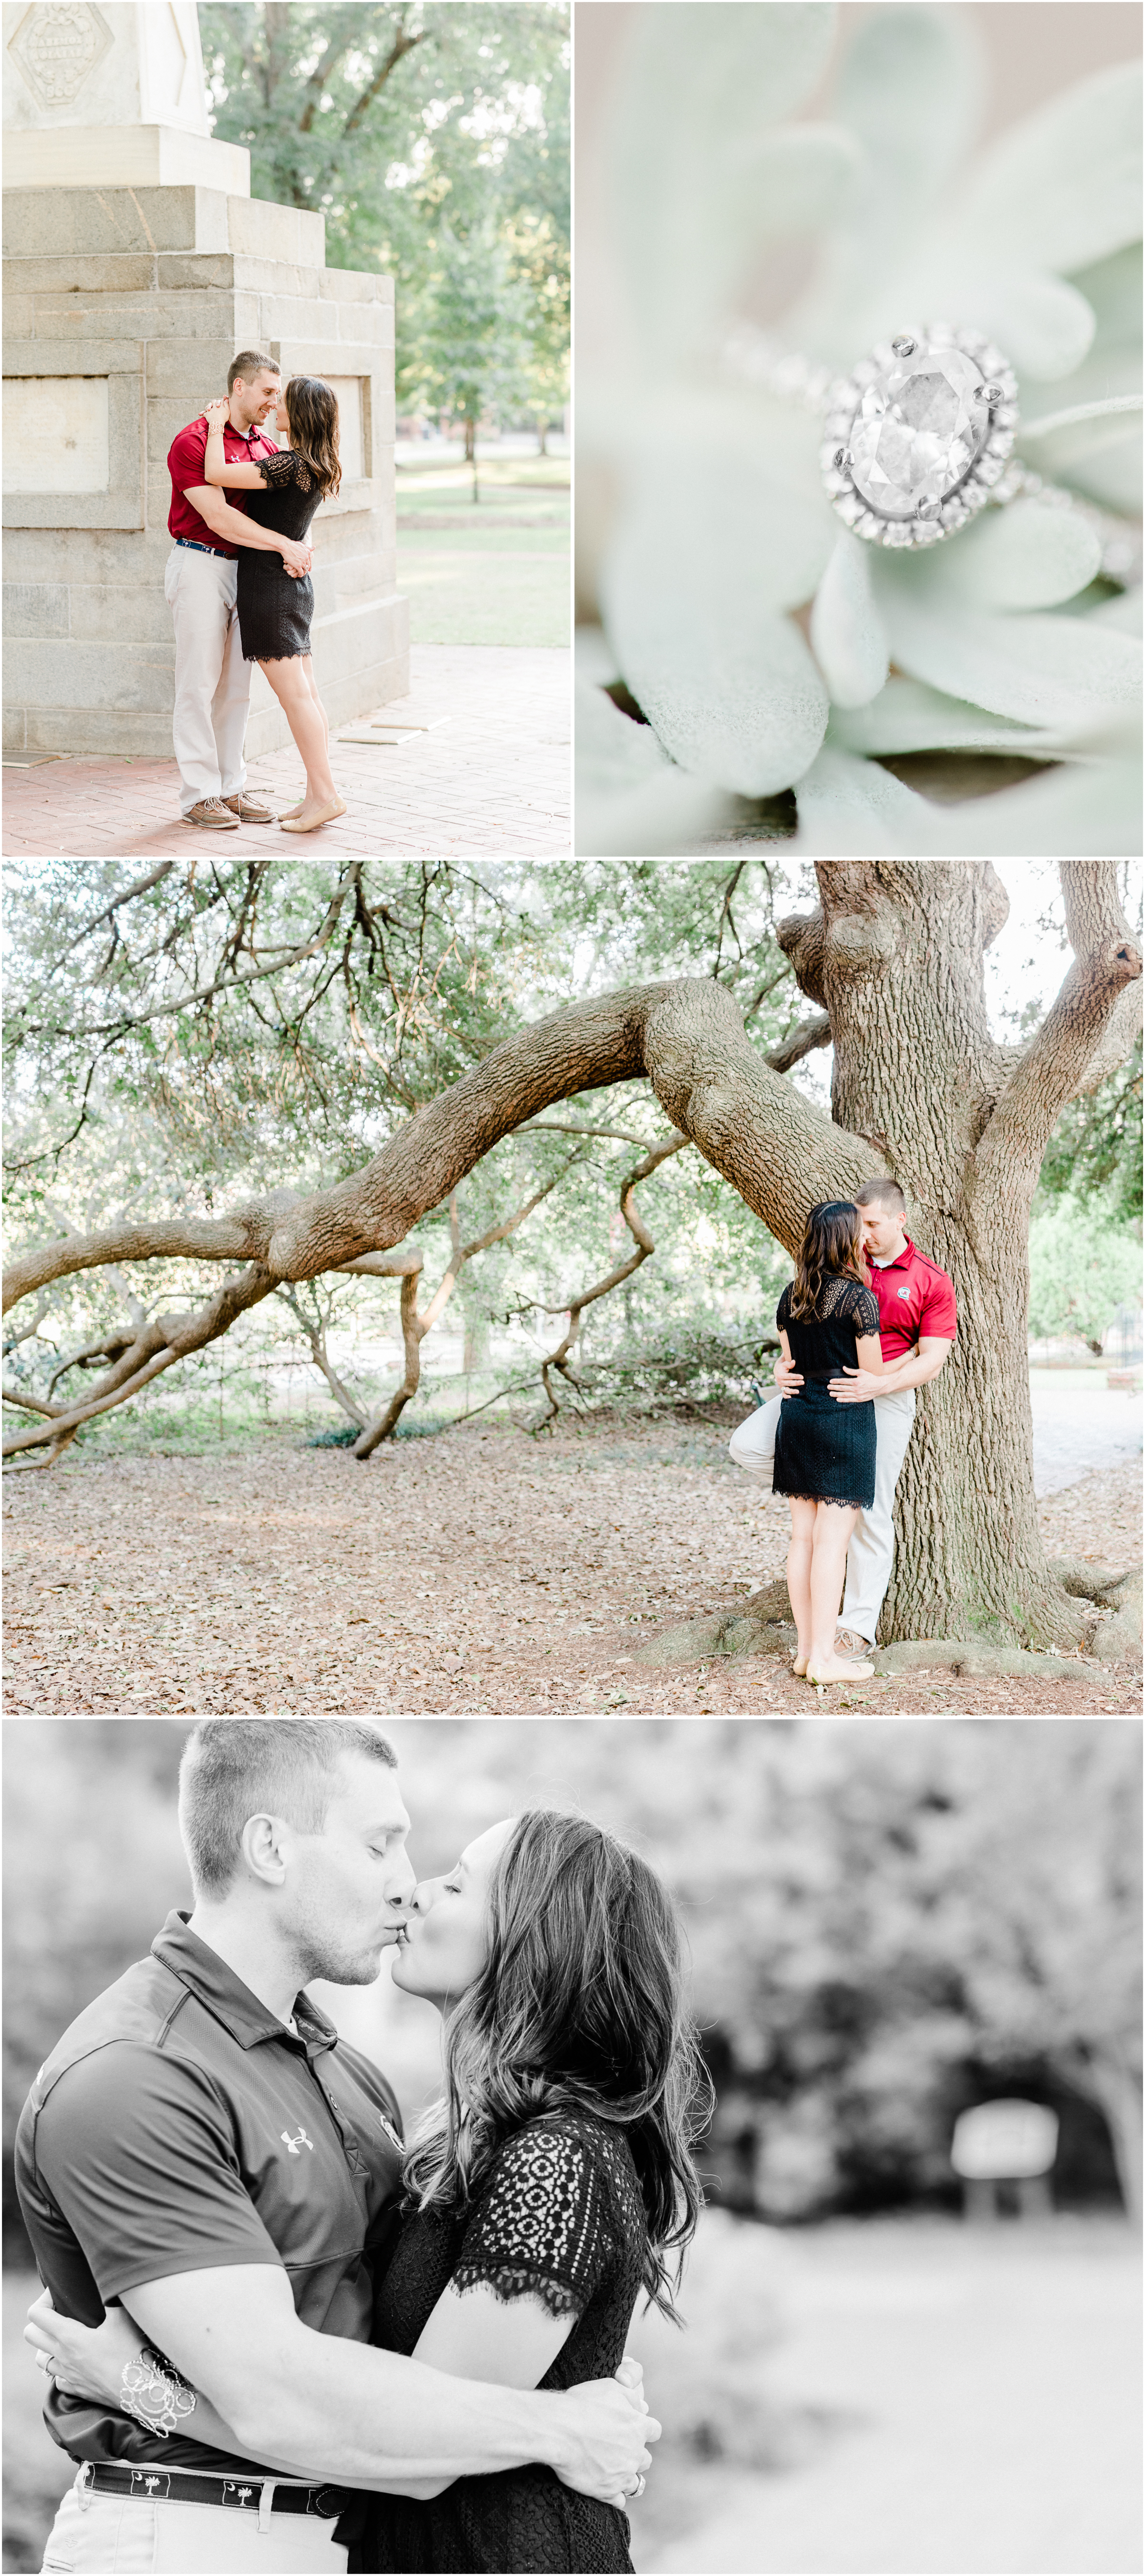 University of South Carolina Engagement Session in Columbia, SC